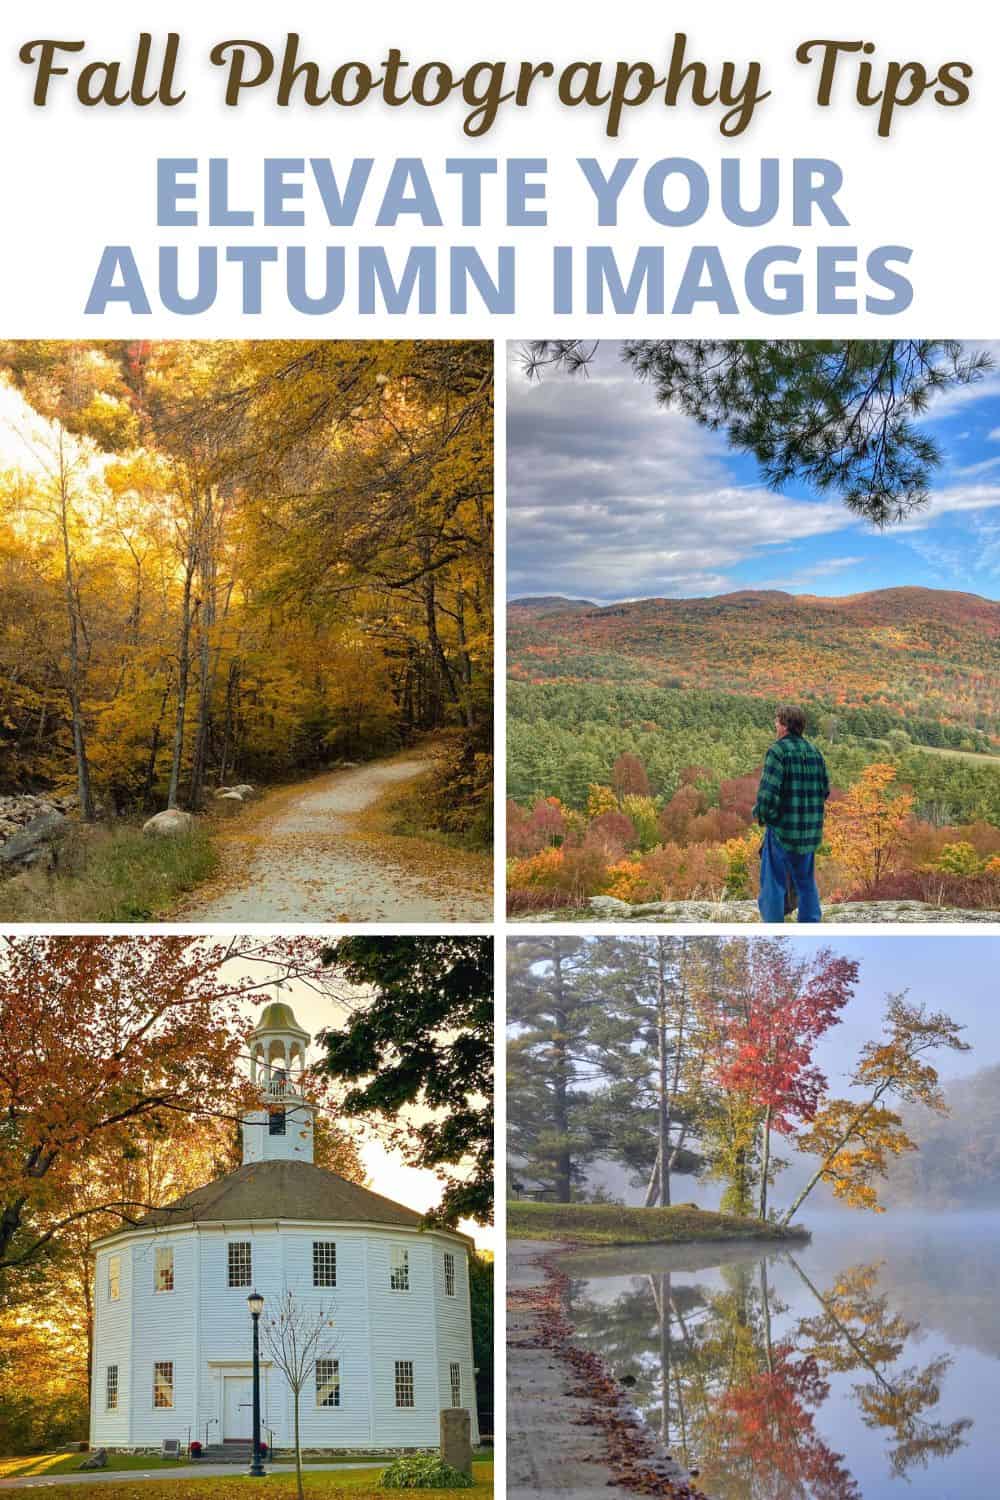 A collage of fall images with text overlay: Fall Photography Tips - Elevate your autumn images